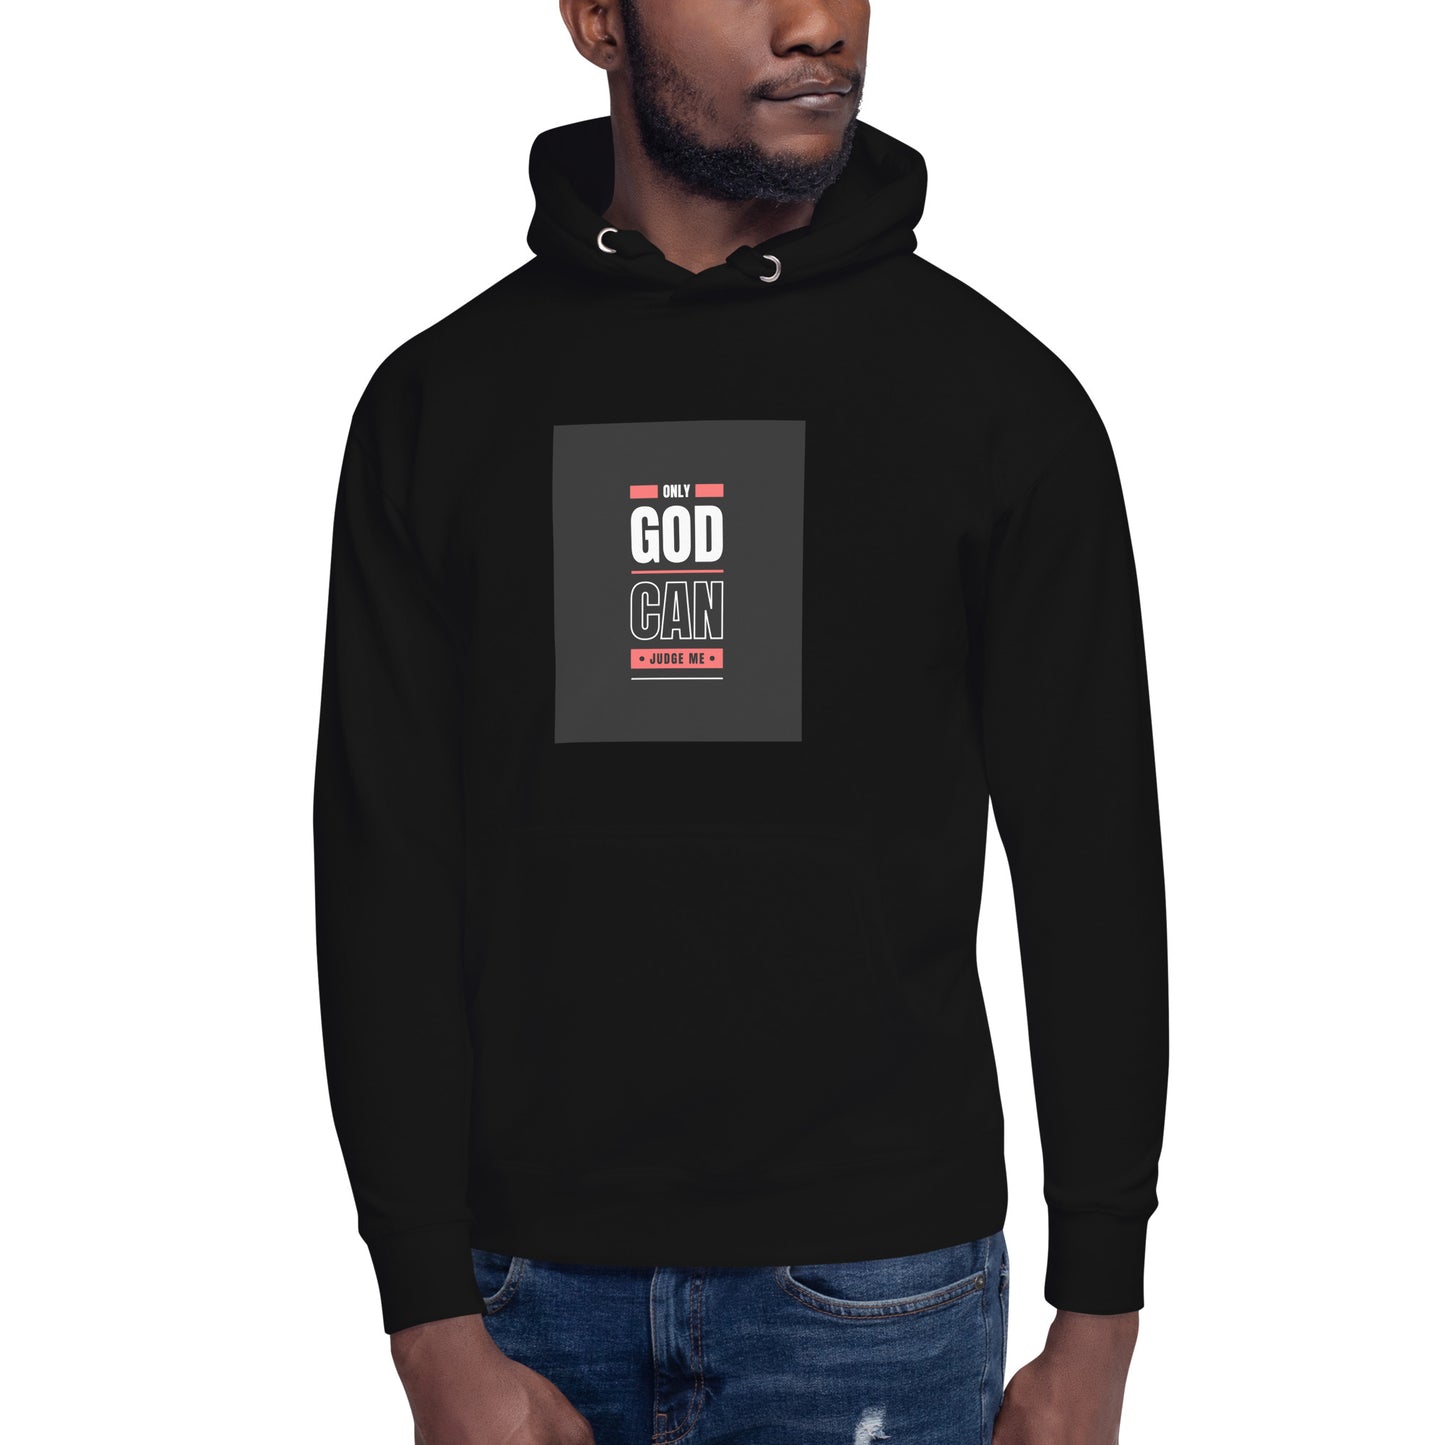 ONLY GOD CAN JUDGE ME MEN'S Hoodie